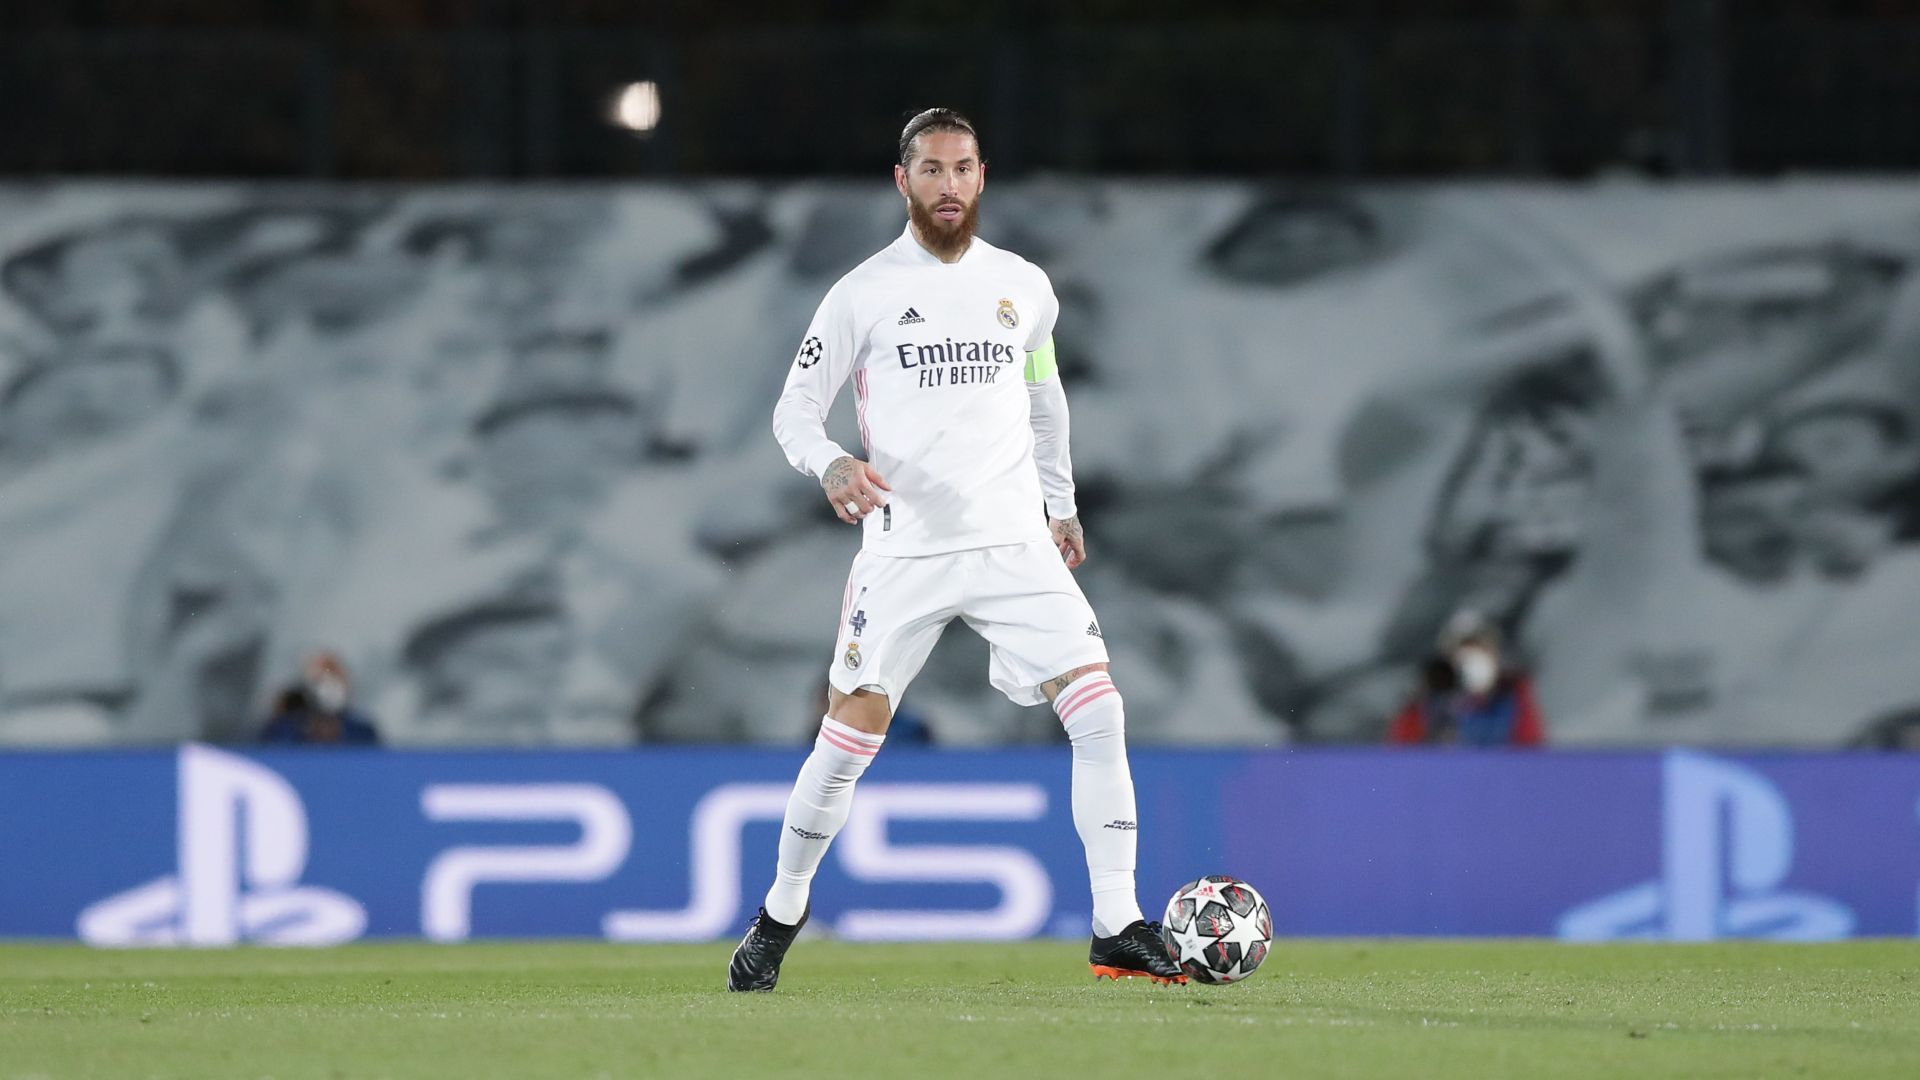 Ramos became captain of the club